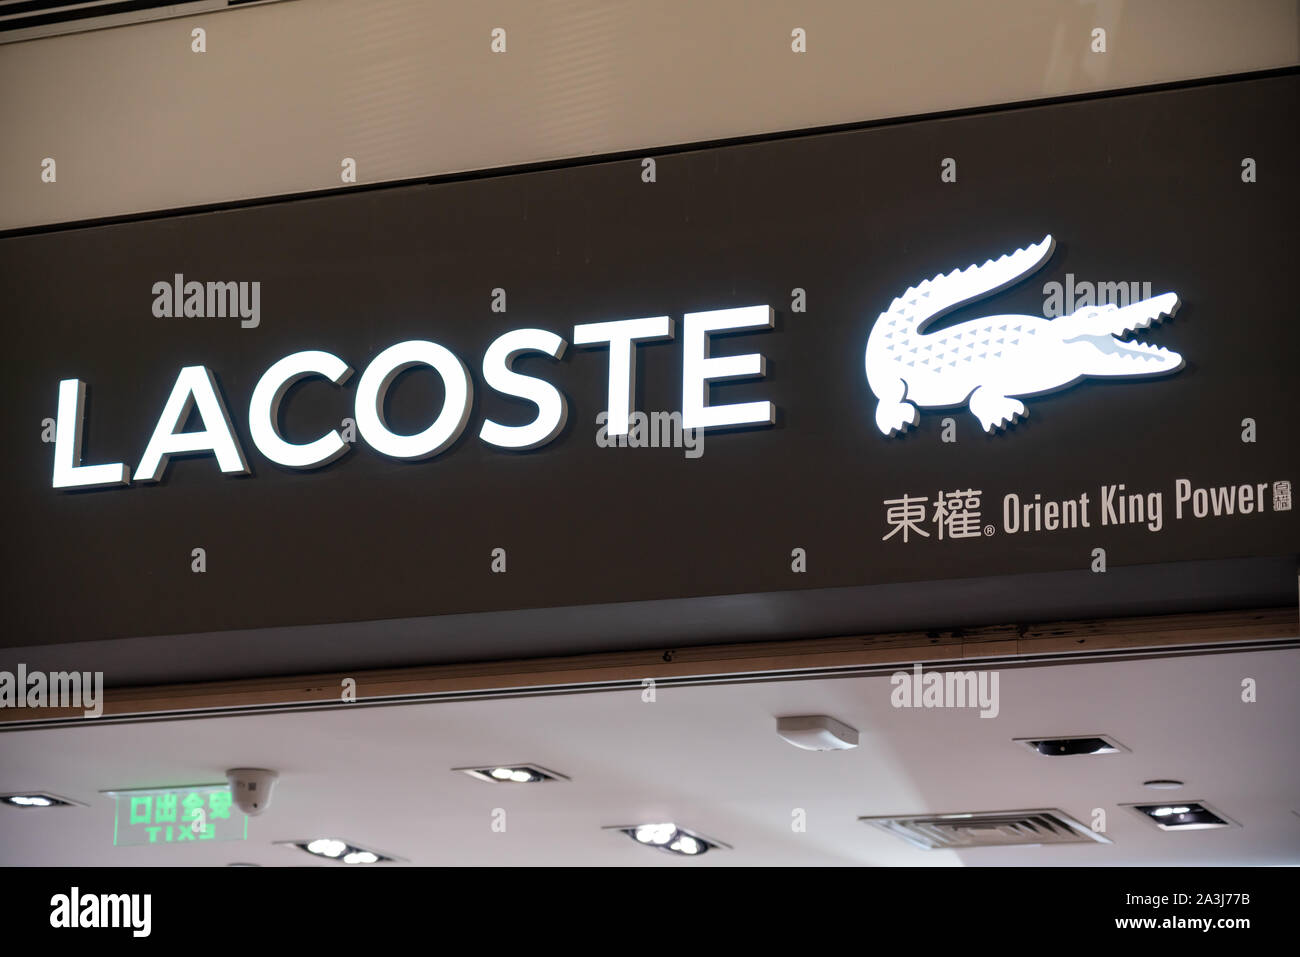 French fashion and sportswear retailer, Lacoste logo seen in Shanghai Pudong International Airport. Stock Photo